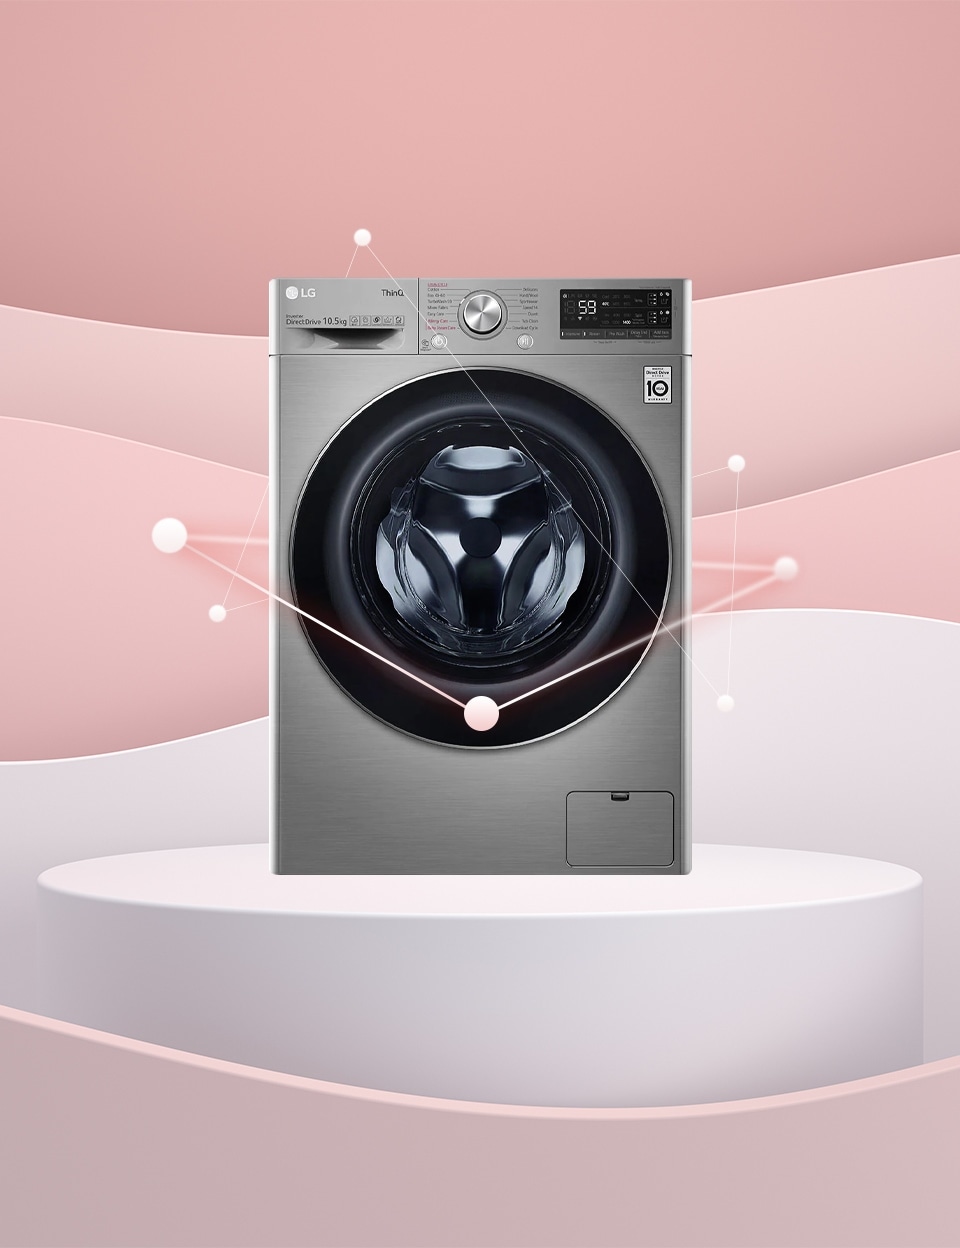 Accessible smart washing machines are a type of assistive technology.